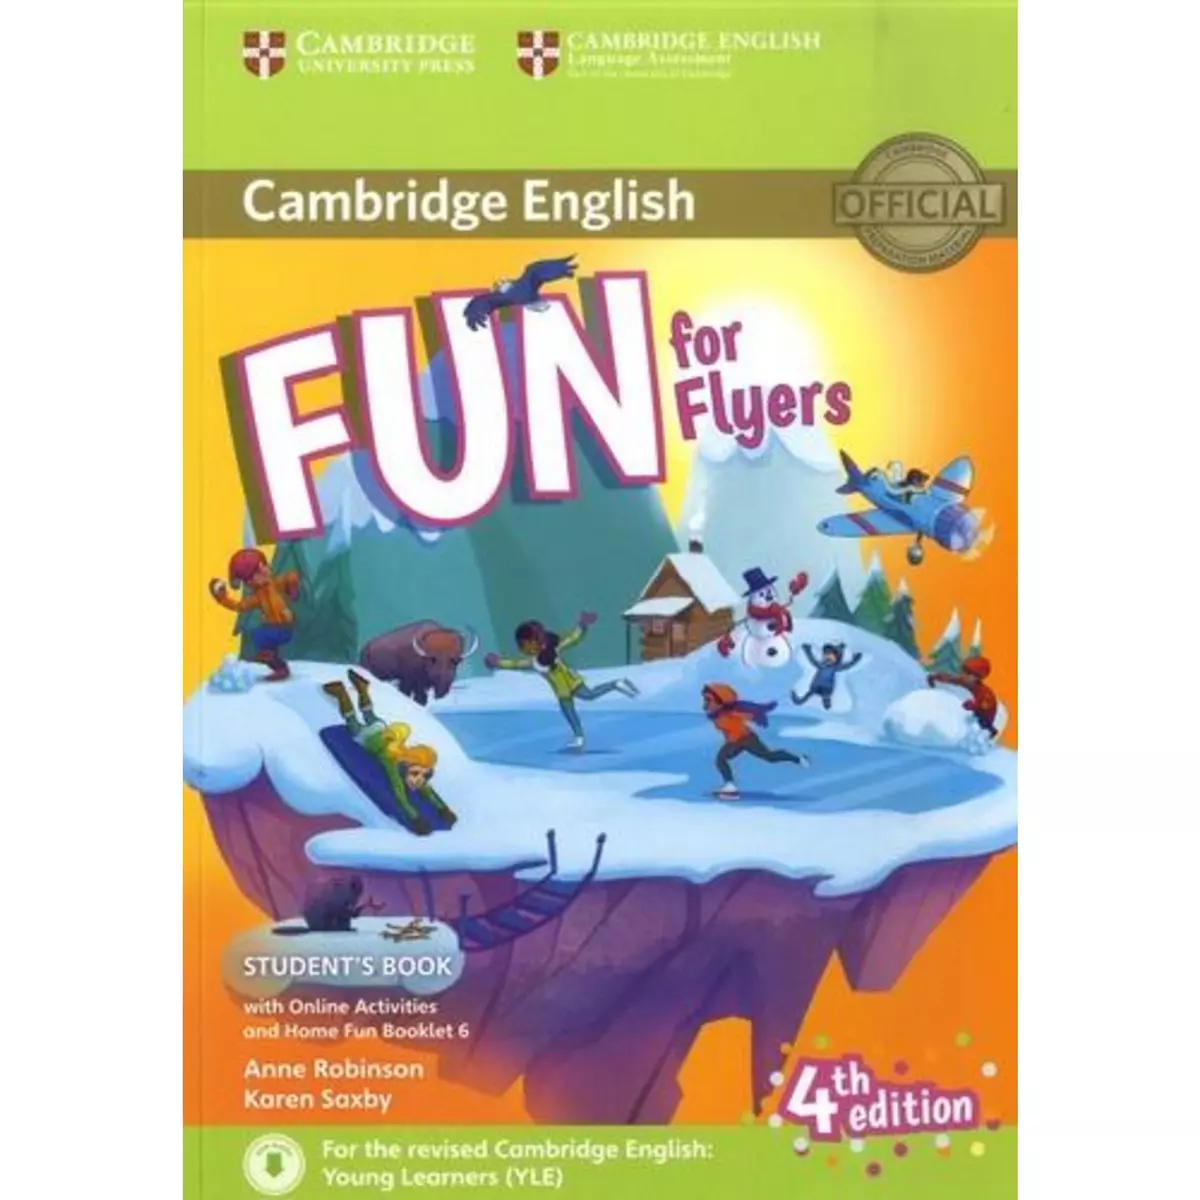  FUN FOR FLYERS STUDENT'S BOOK + HOME FUN BOOKLET. PACK EN 2 VOLUMES, 4TH EDITION, EDITION EN ANGLAIS, Robinson Anne